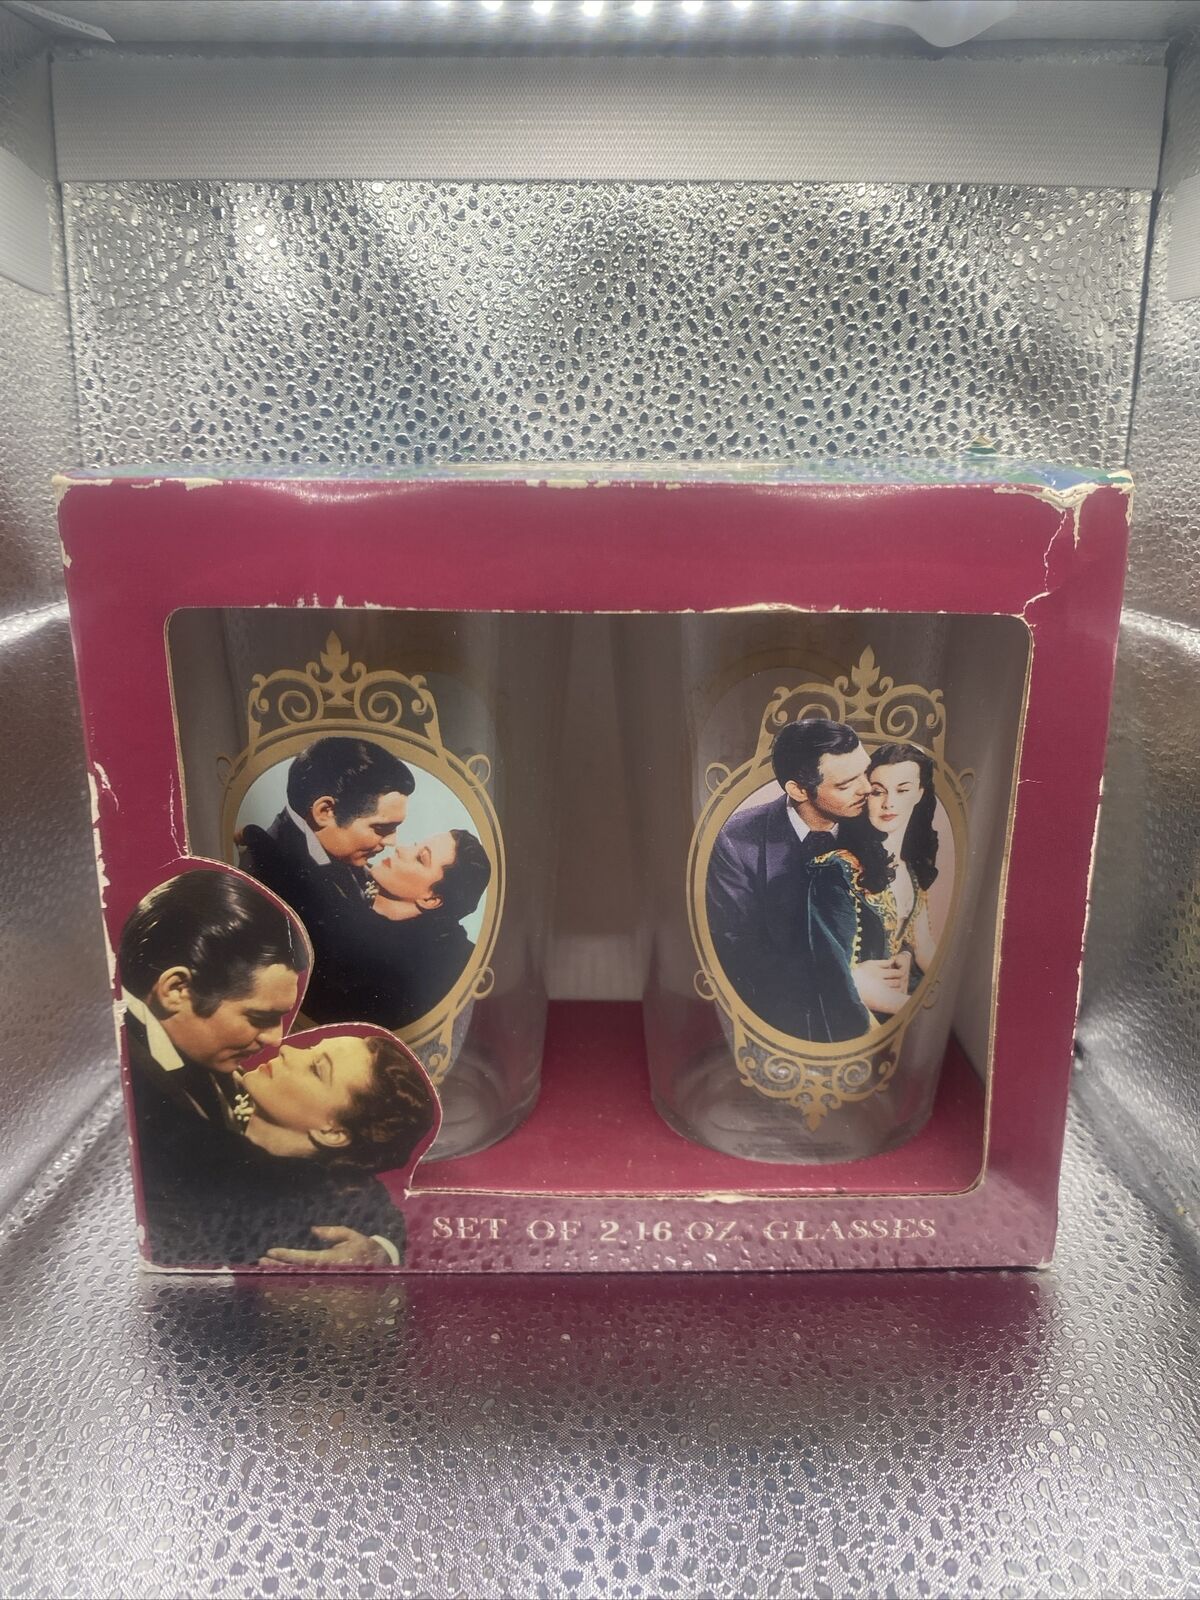 Vintage GONE WITH THE WIND Set of 2. 16 oz. Drinking Glasses In Original Box